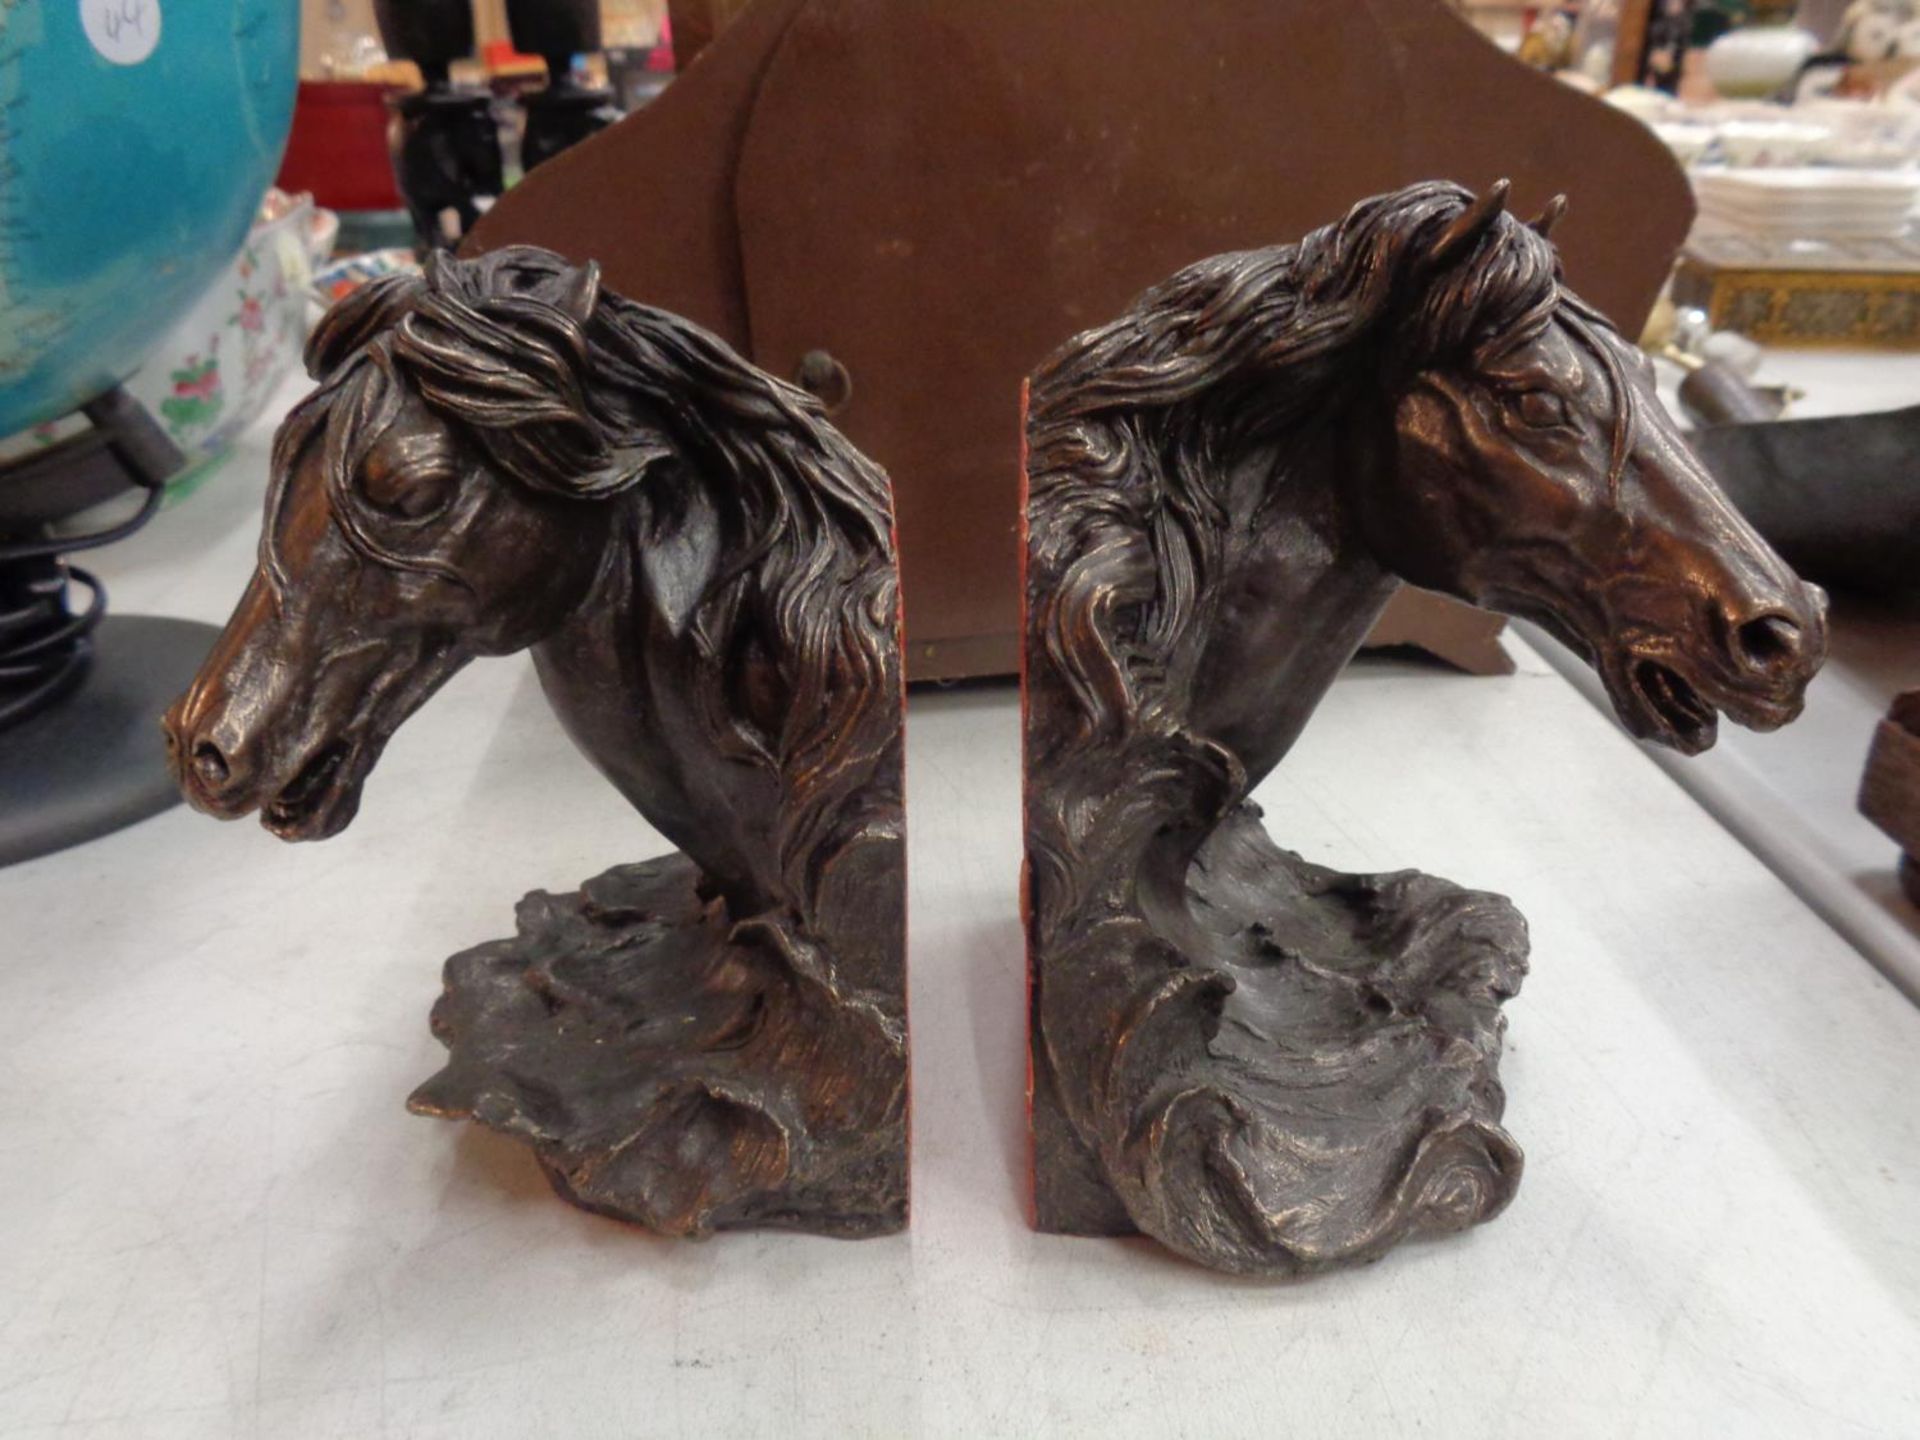 TWO RESIN HORSE HEAD BOOK ENDS - Image 2 of 6